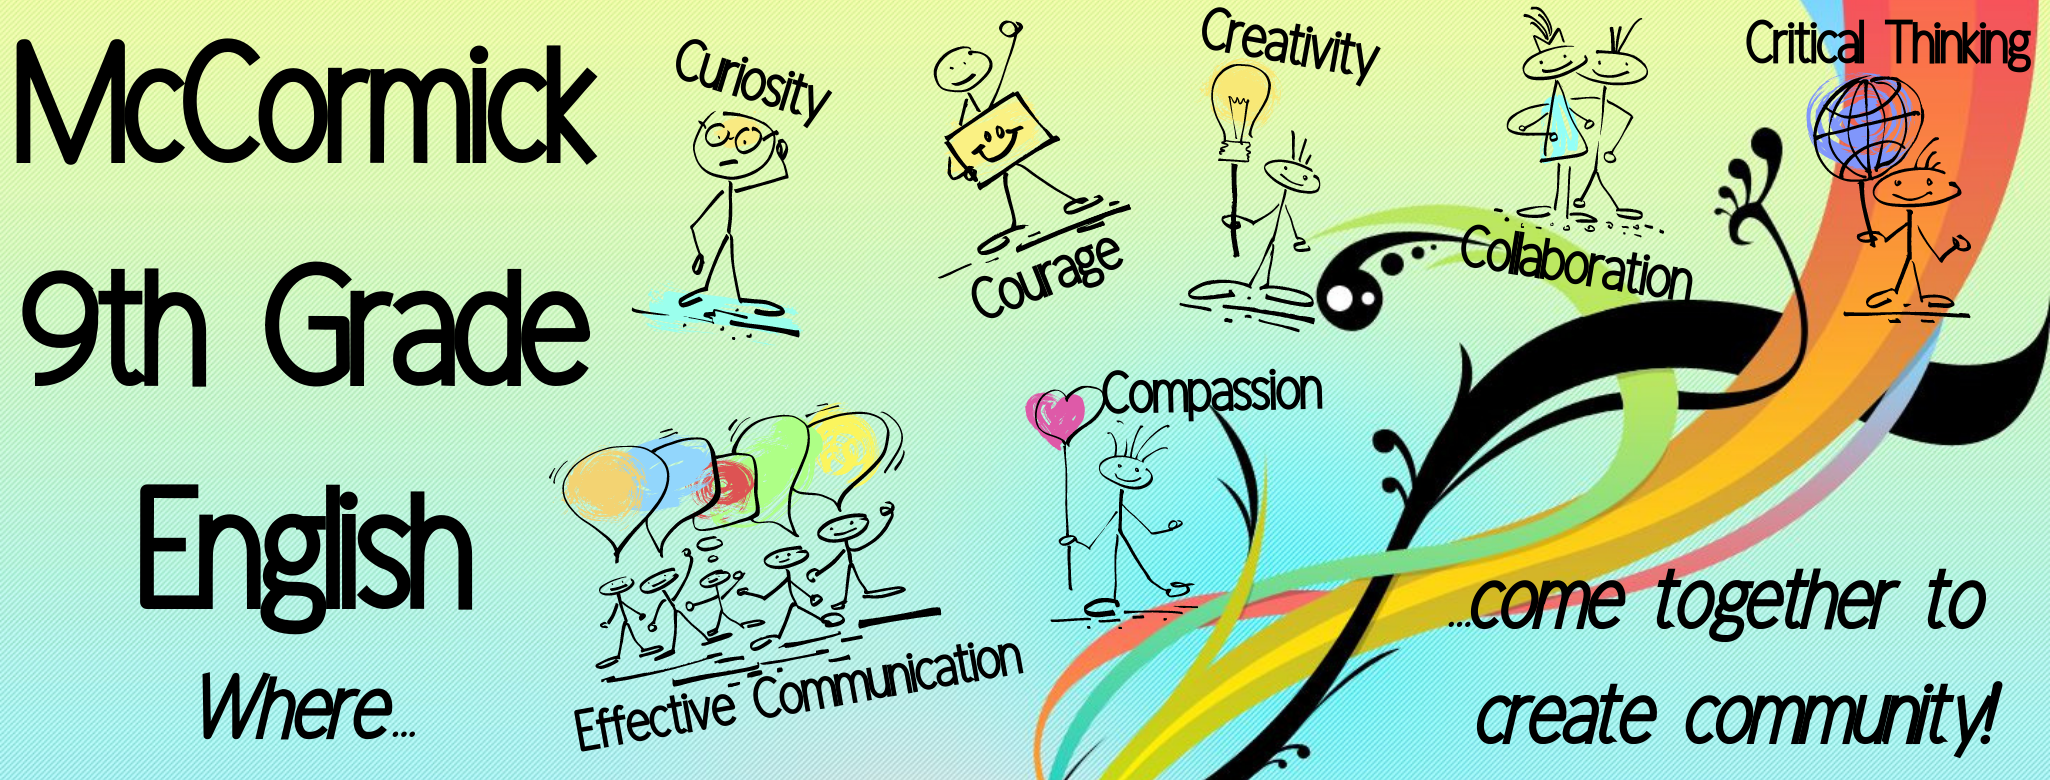 Where, curiosity, courage, creativity, collaboration, critical thinking, effective communication, & compassion come together to create community!